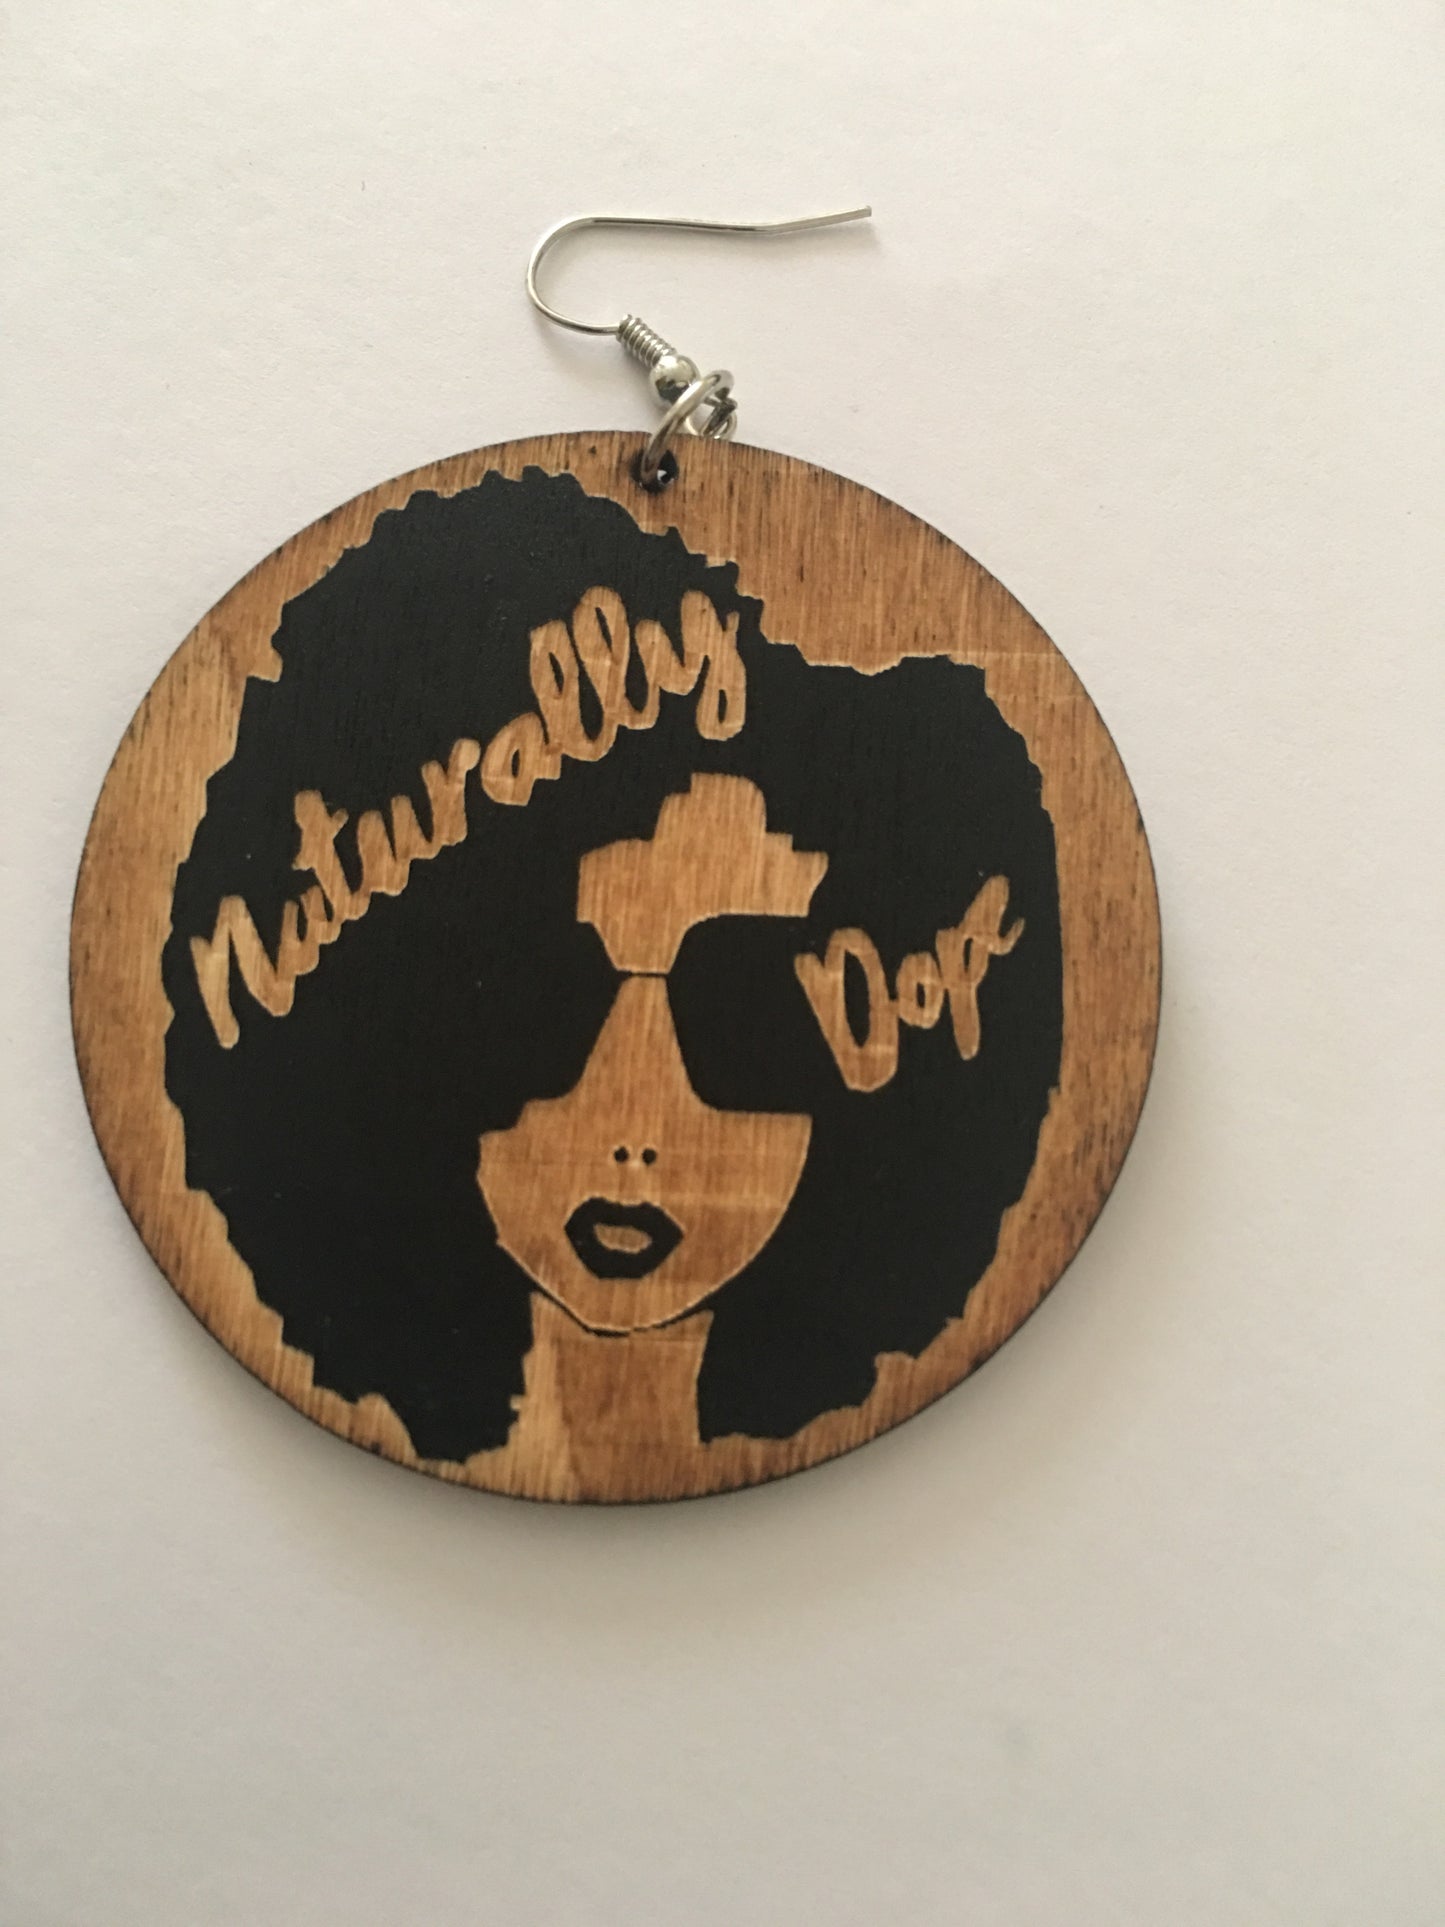 Naturally dope - afro earrings